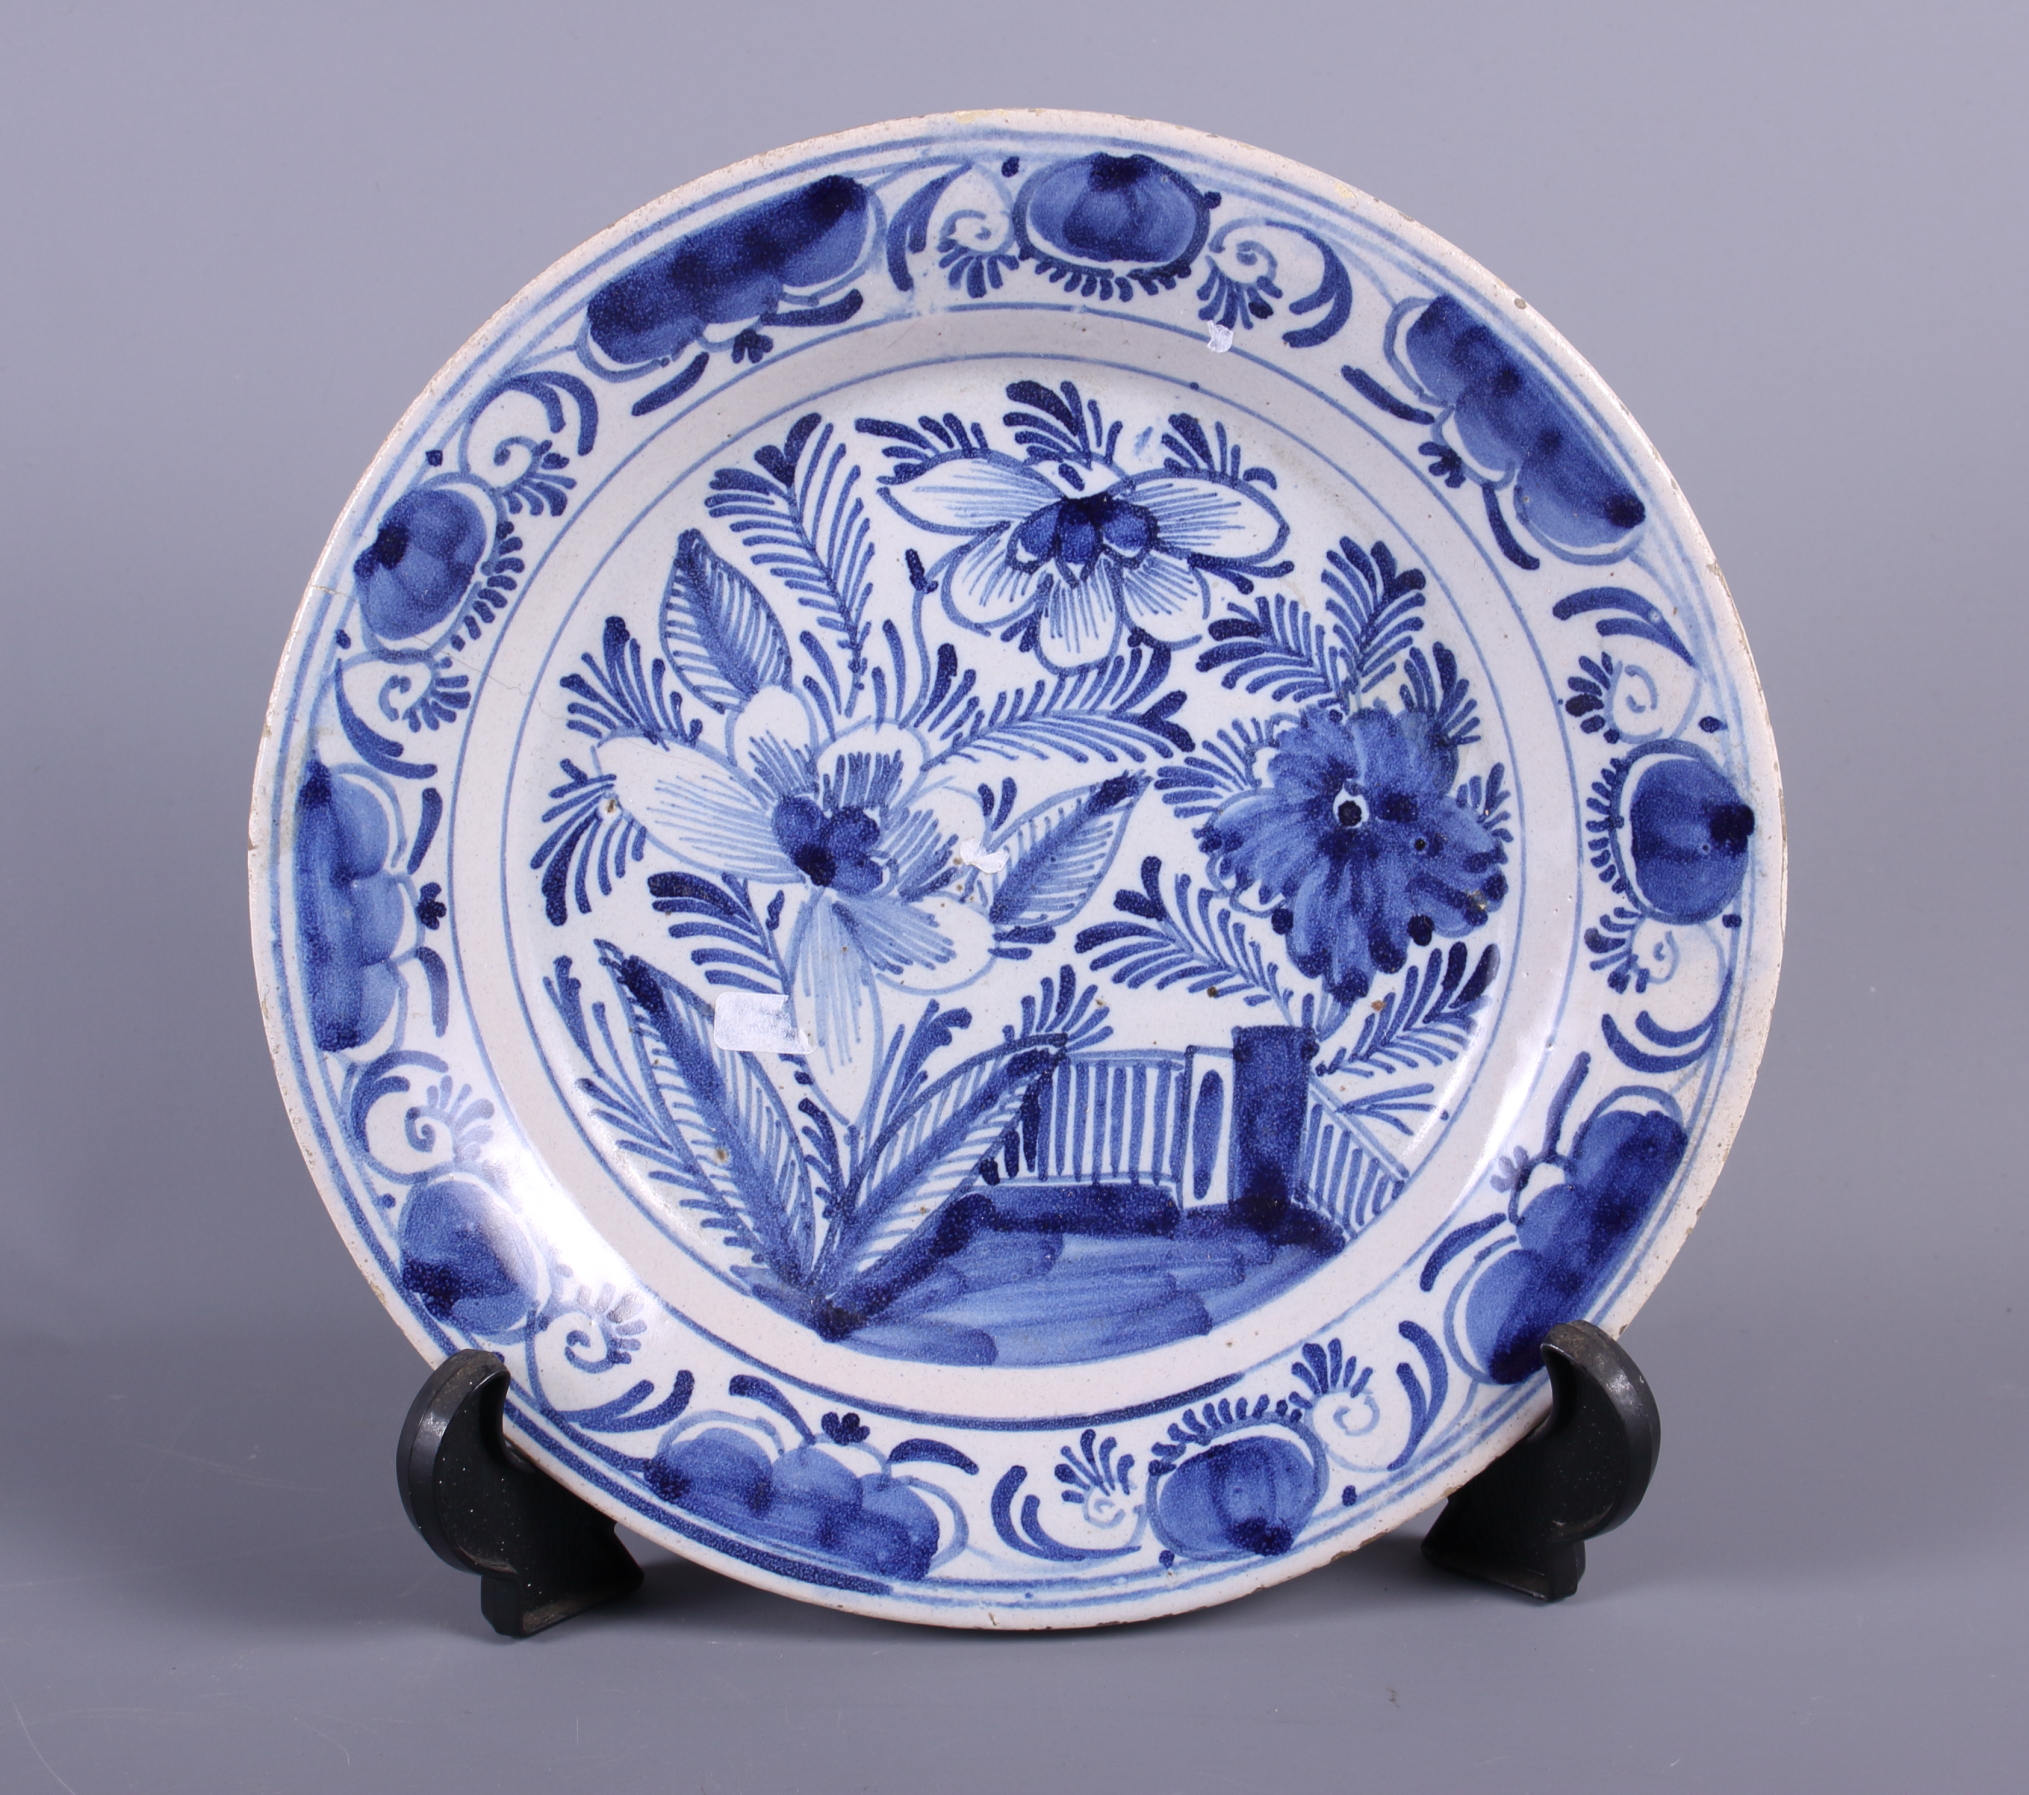 An 18th century blue and white Delft plate with tree and fence decoration, 9" dia (hair crack)